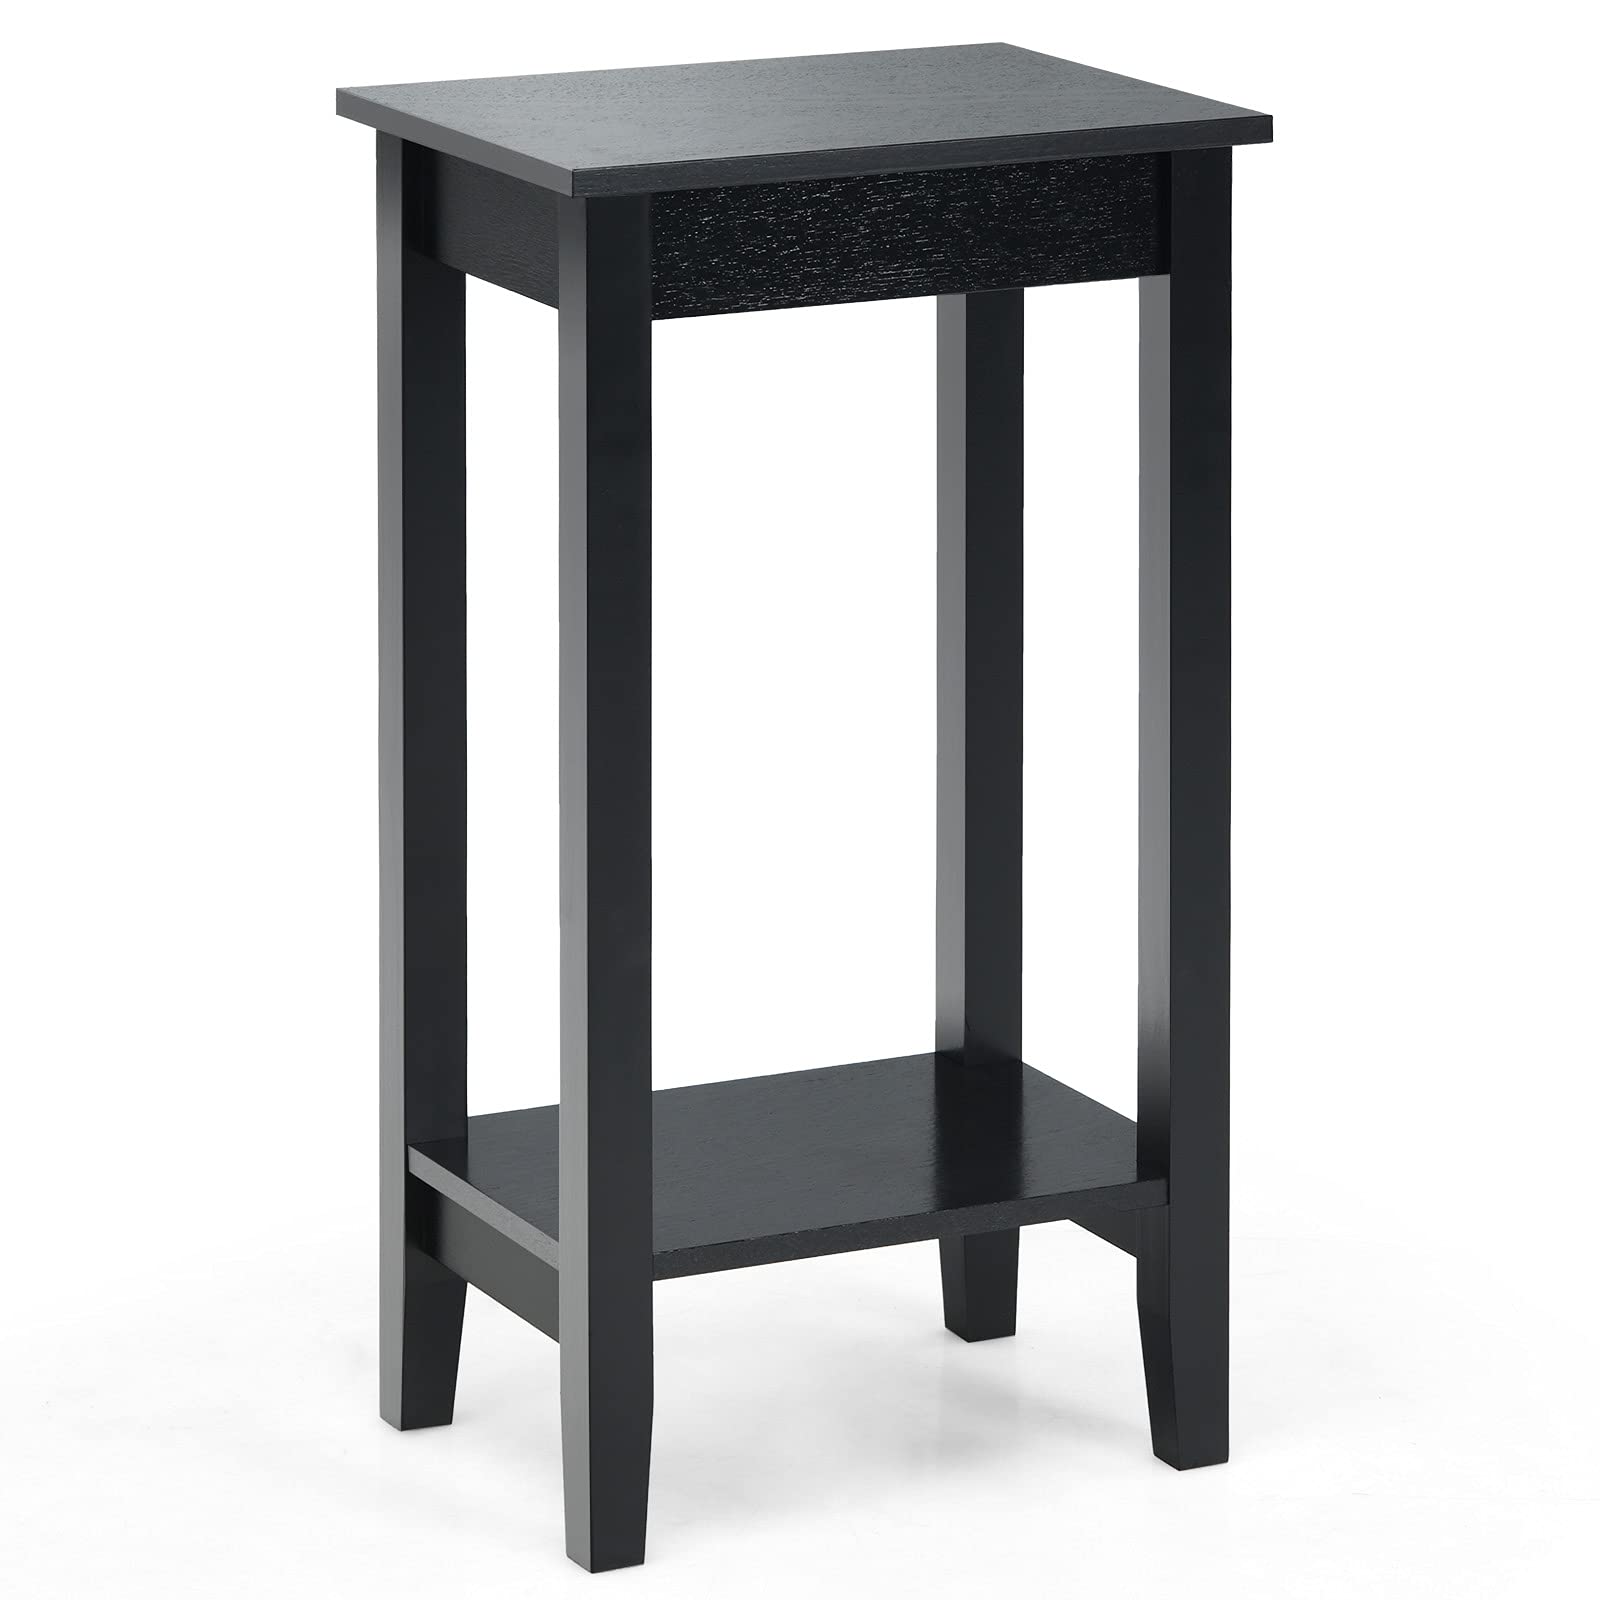 Giantex 2-Tier End Table Tall Nightstand, Simple Design Sofa Bedside Table